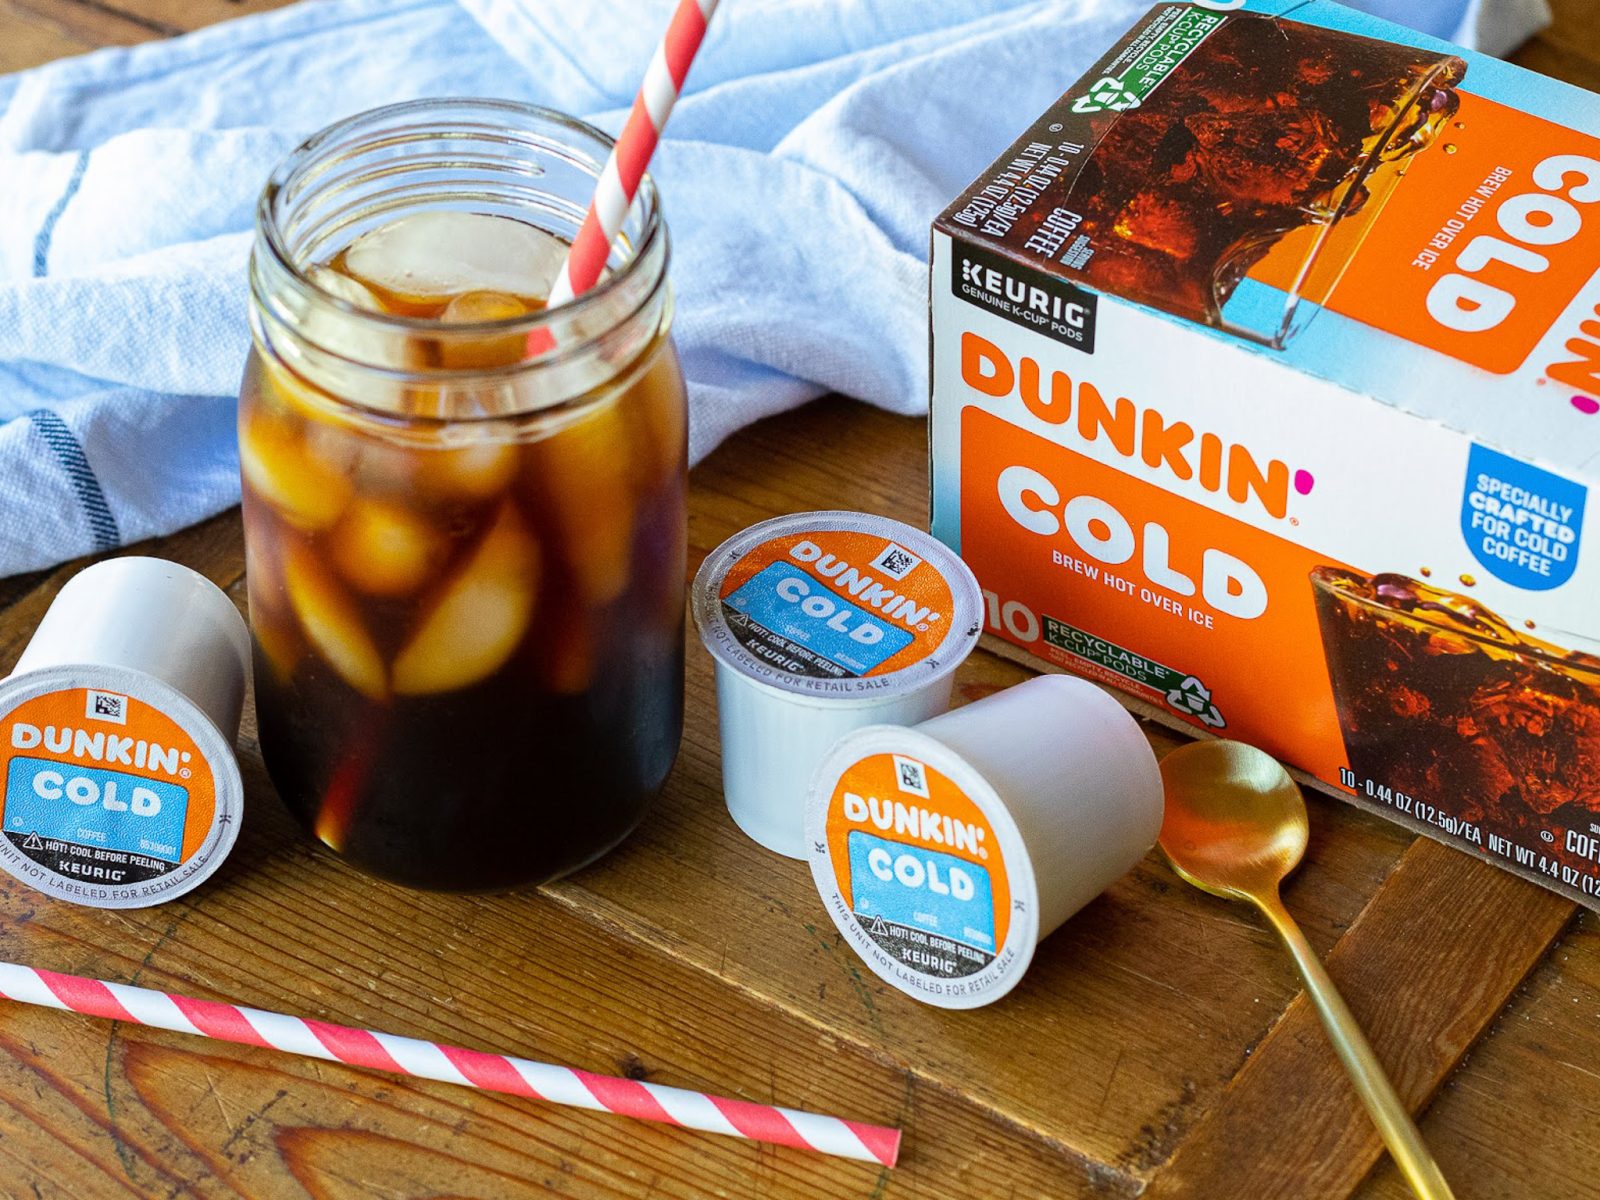 Dunkin’ Donuts Cold Coffee Products Are As Low As $2.99 At Kroger (Save Up To $7)